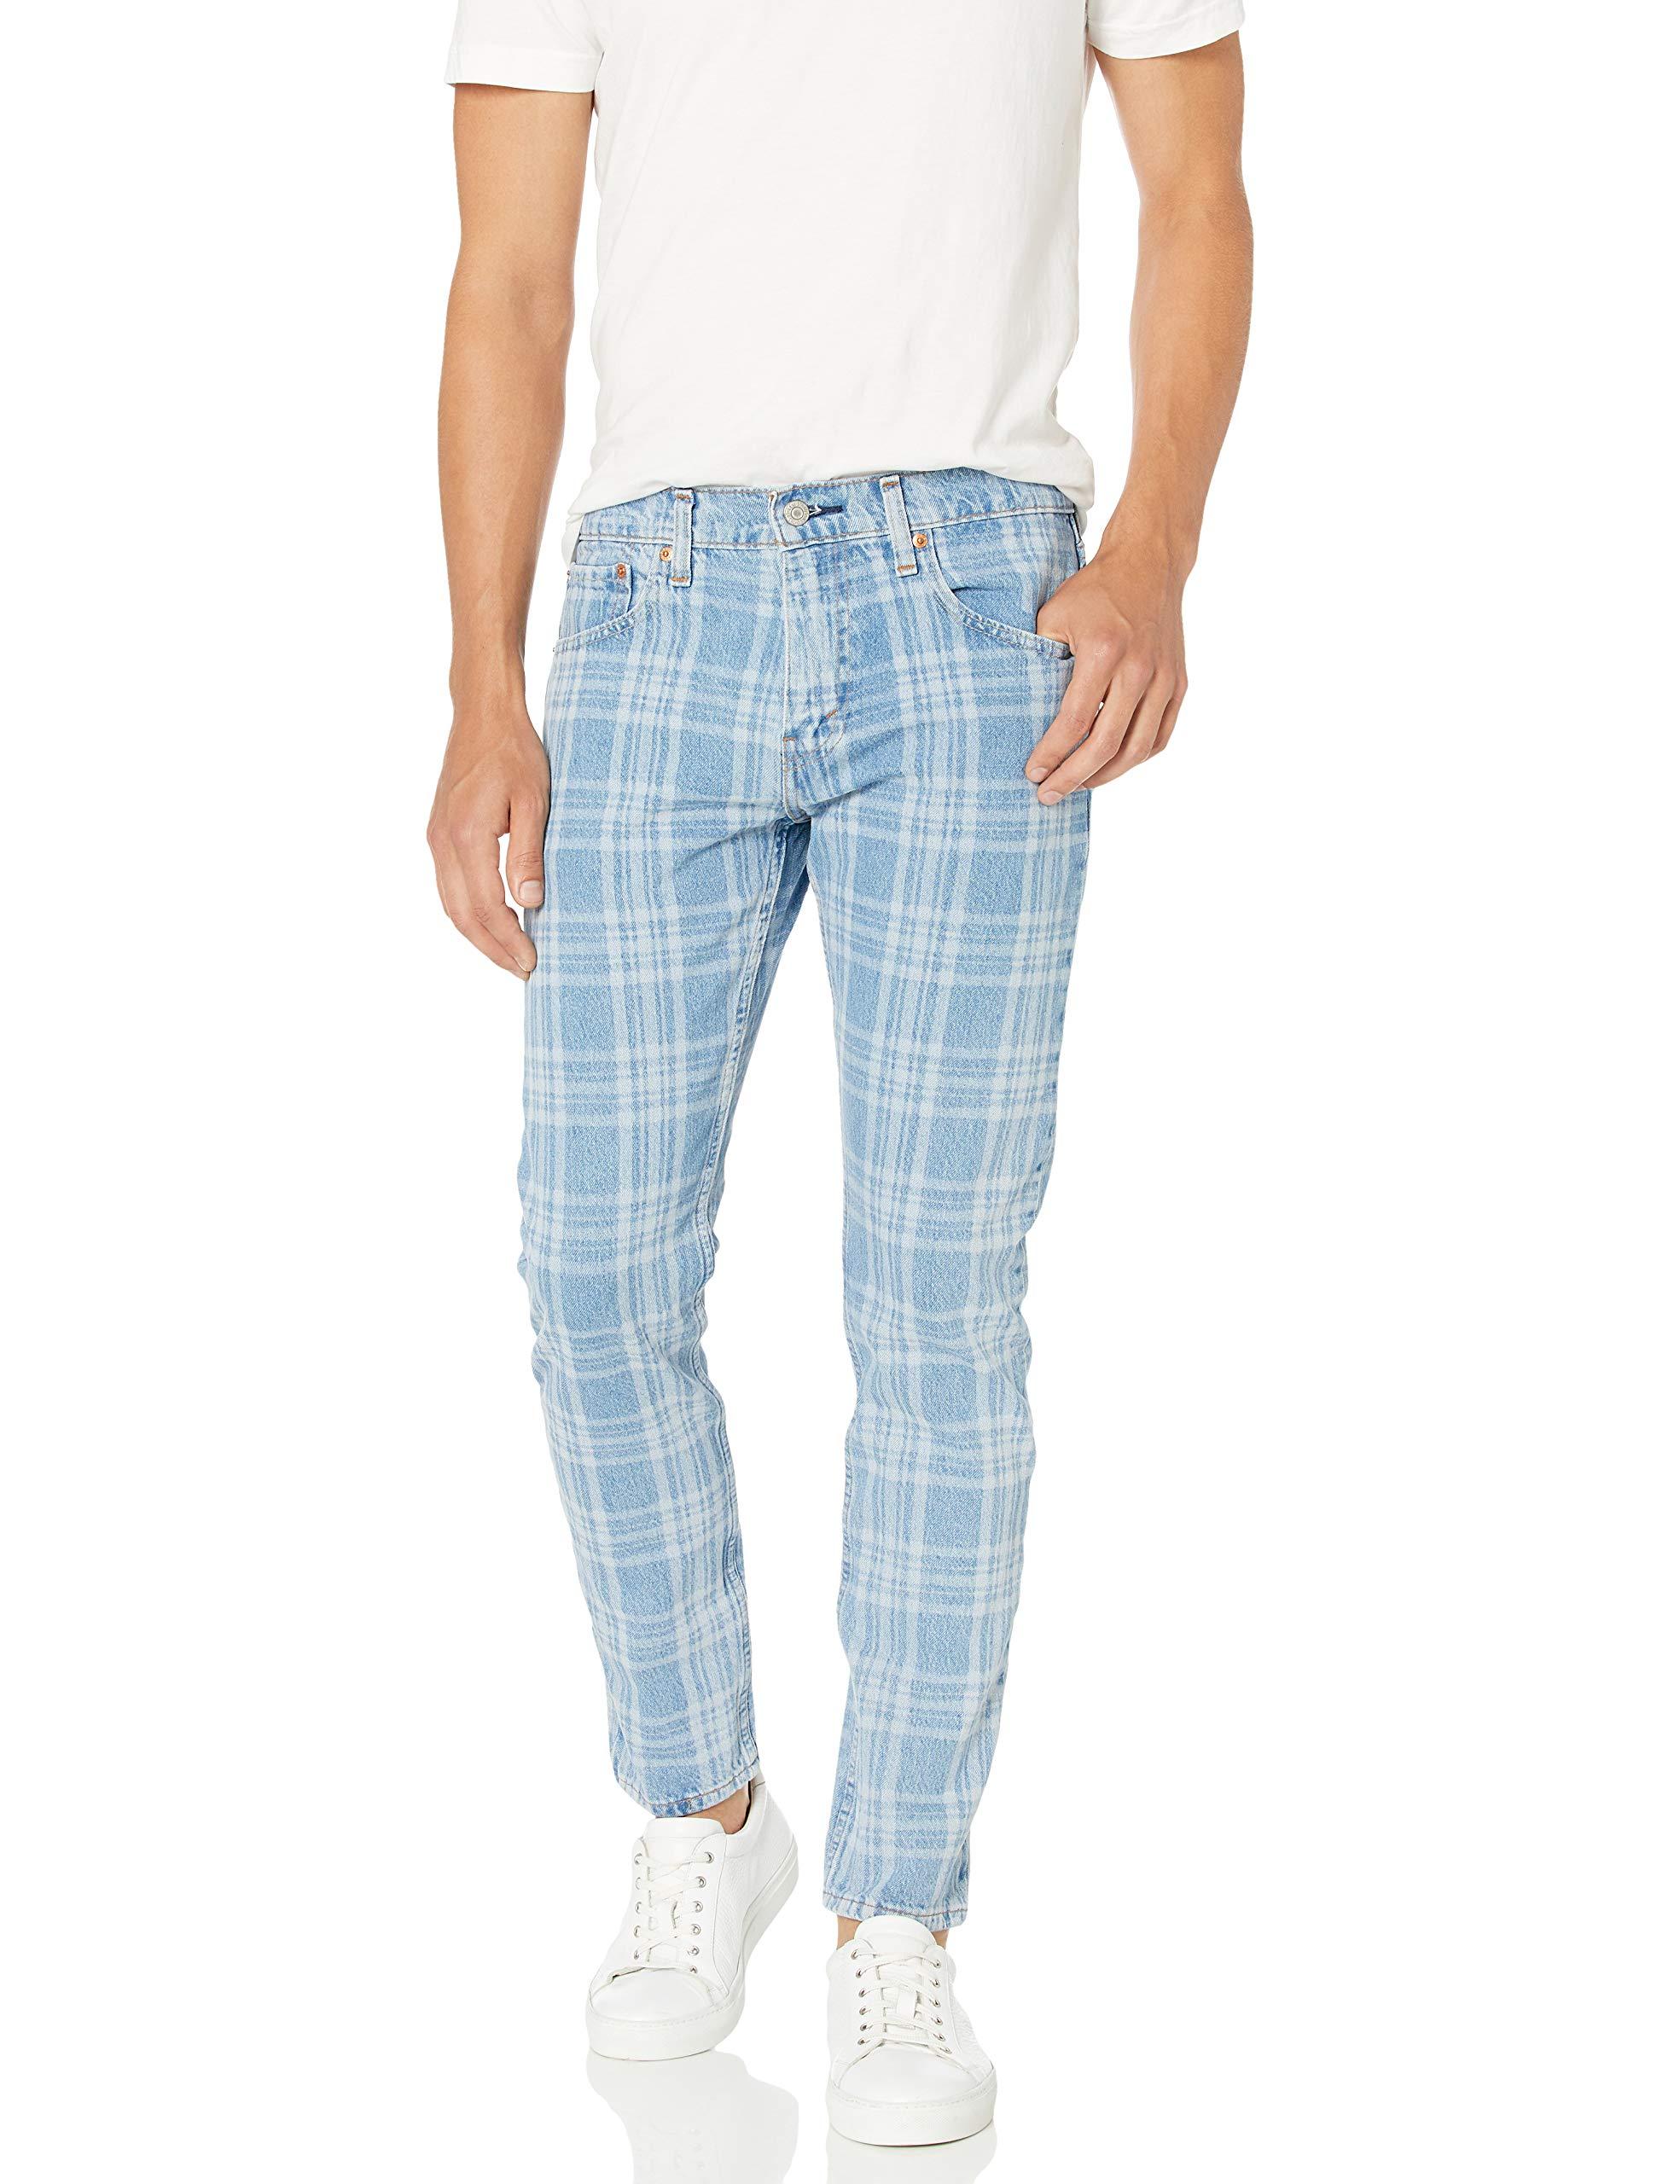 Levis Checkered Jeans Luxembourg, SAVE 58% 